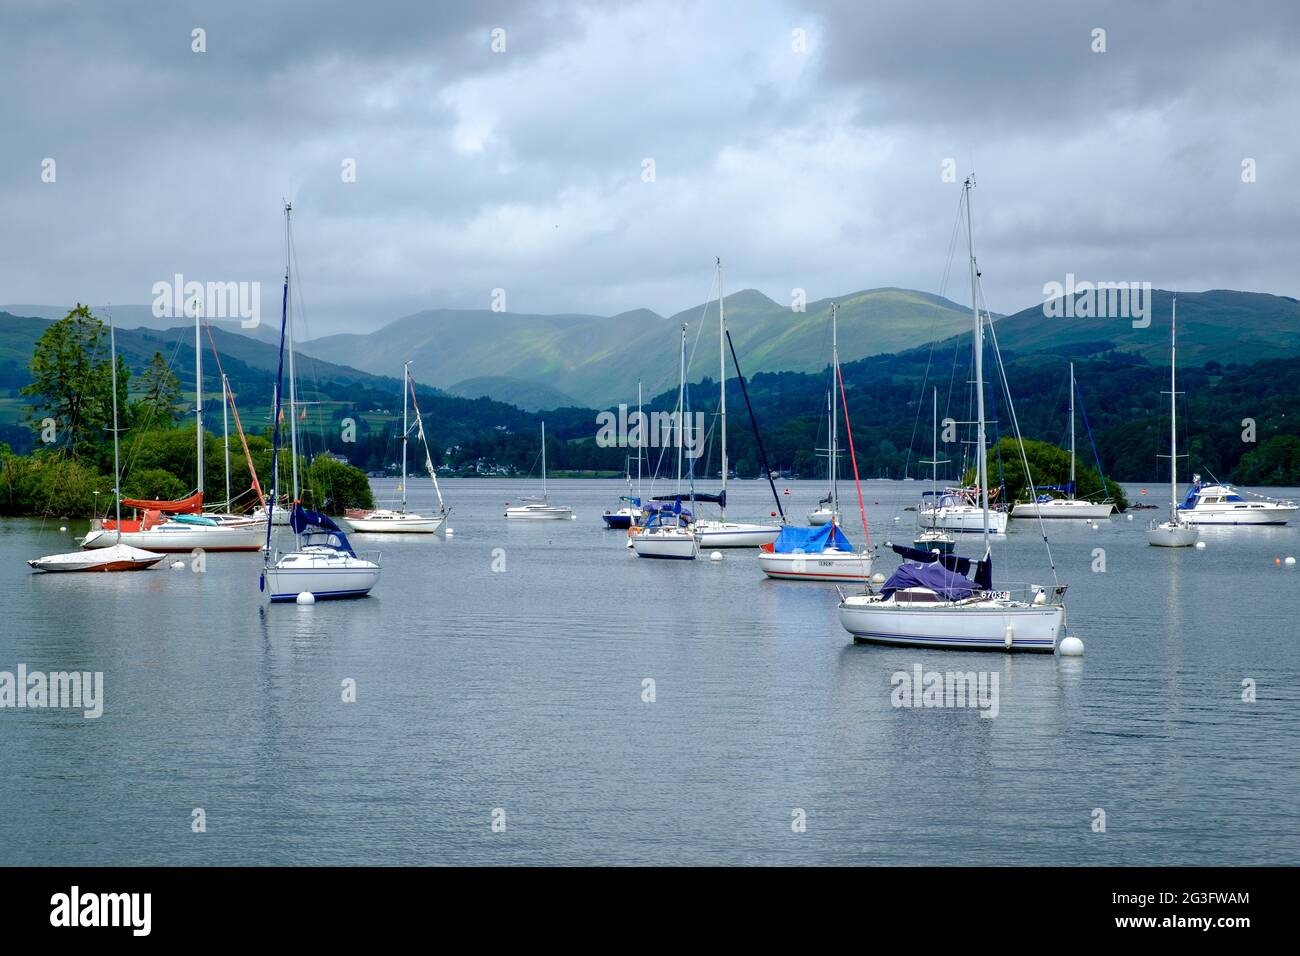 Sailing boats moored on Lake Windermere in the Lakes District, England, UK Stock Photo